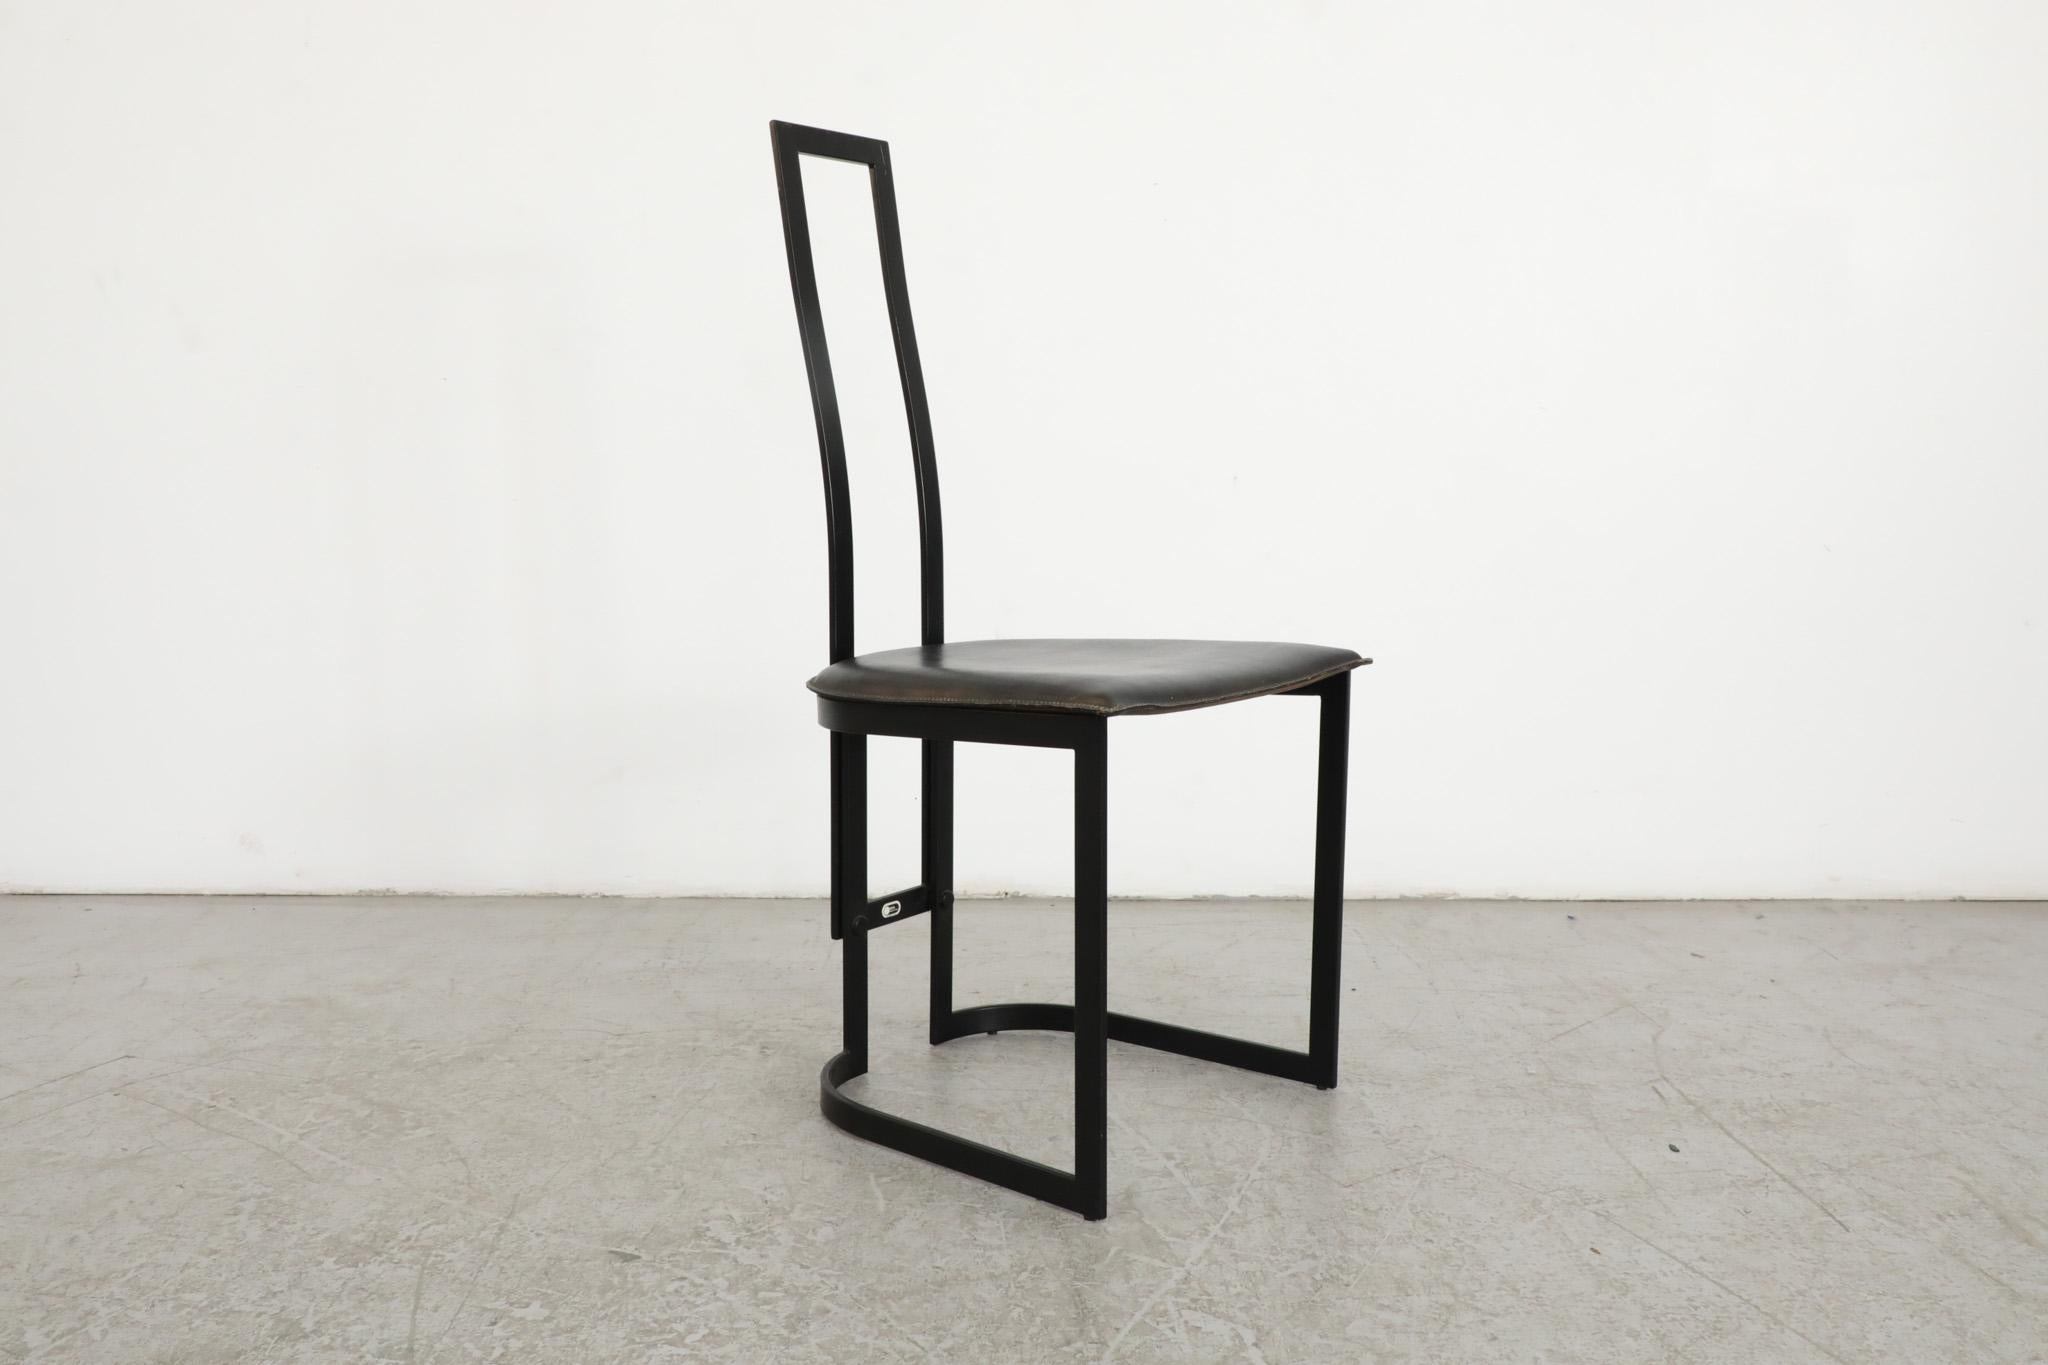 Enamel Modernist Gastone Rinaldi Side Chair for Thema Italy, 1980 For Sale